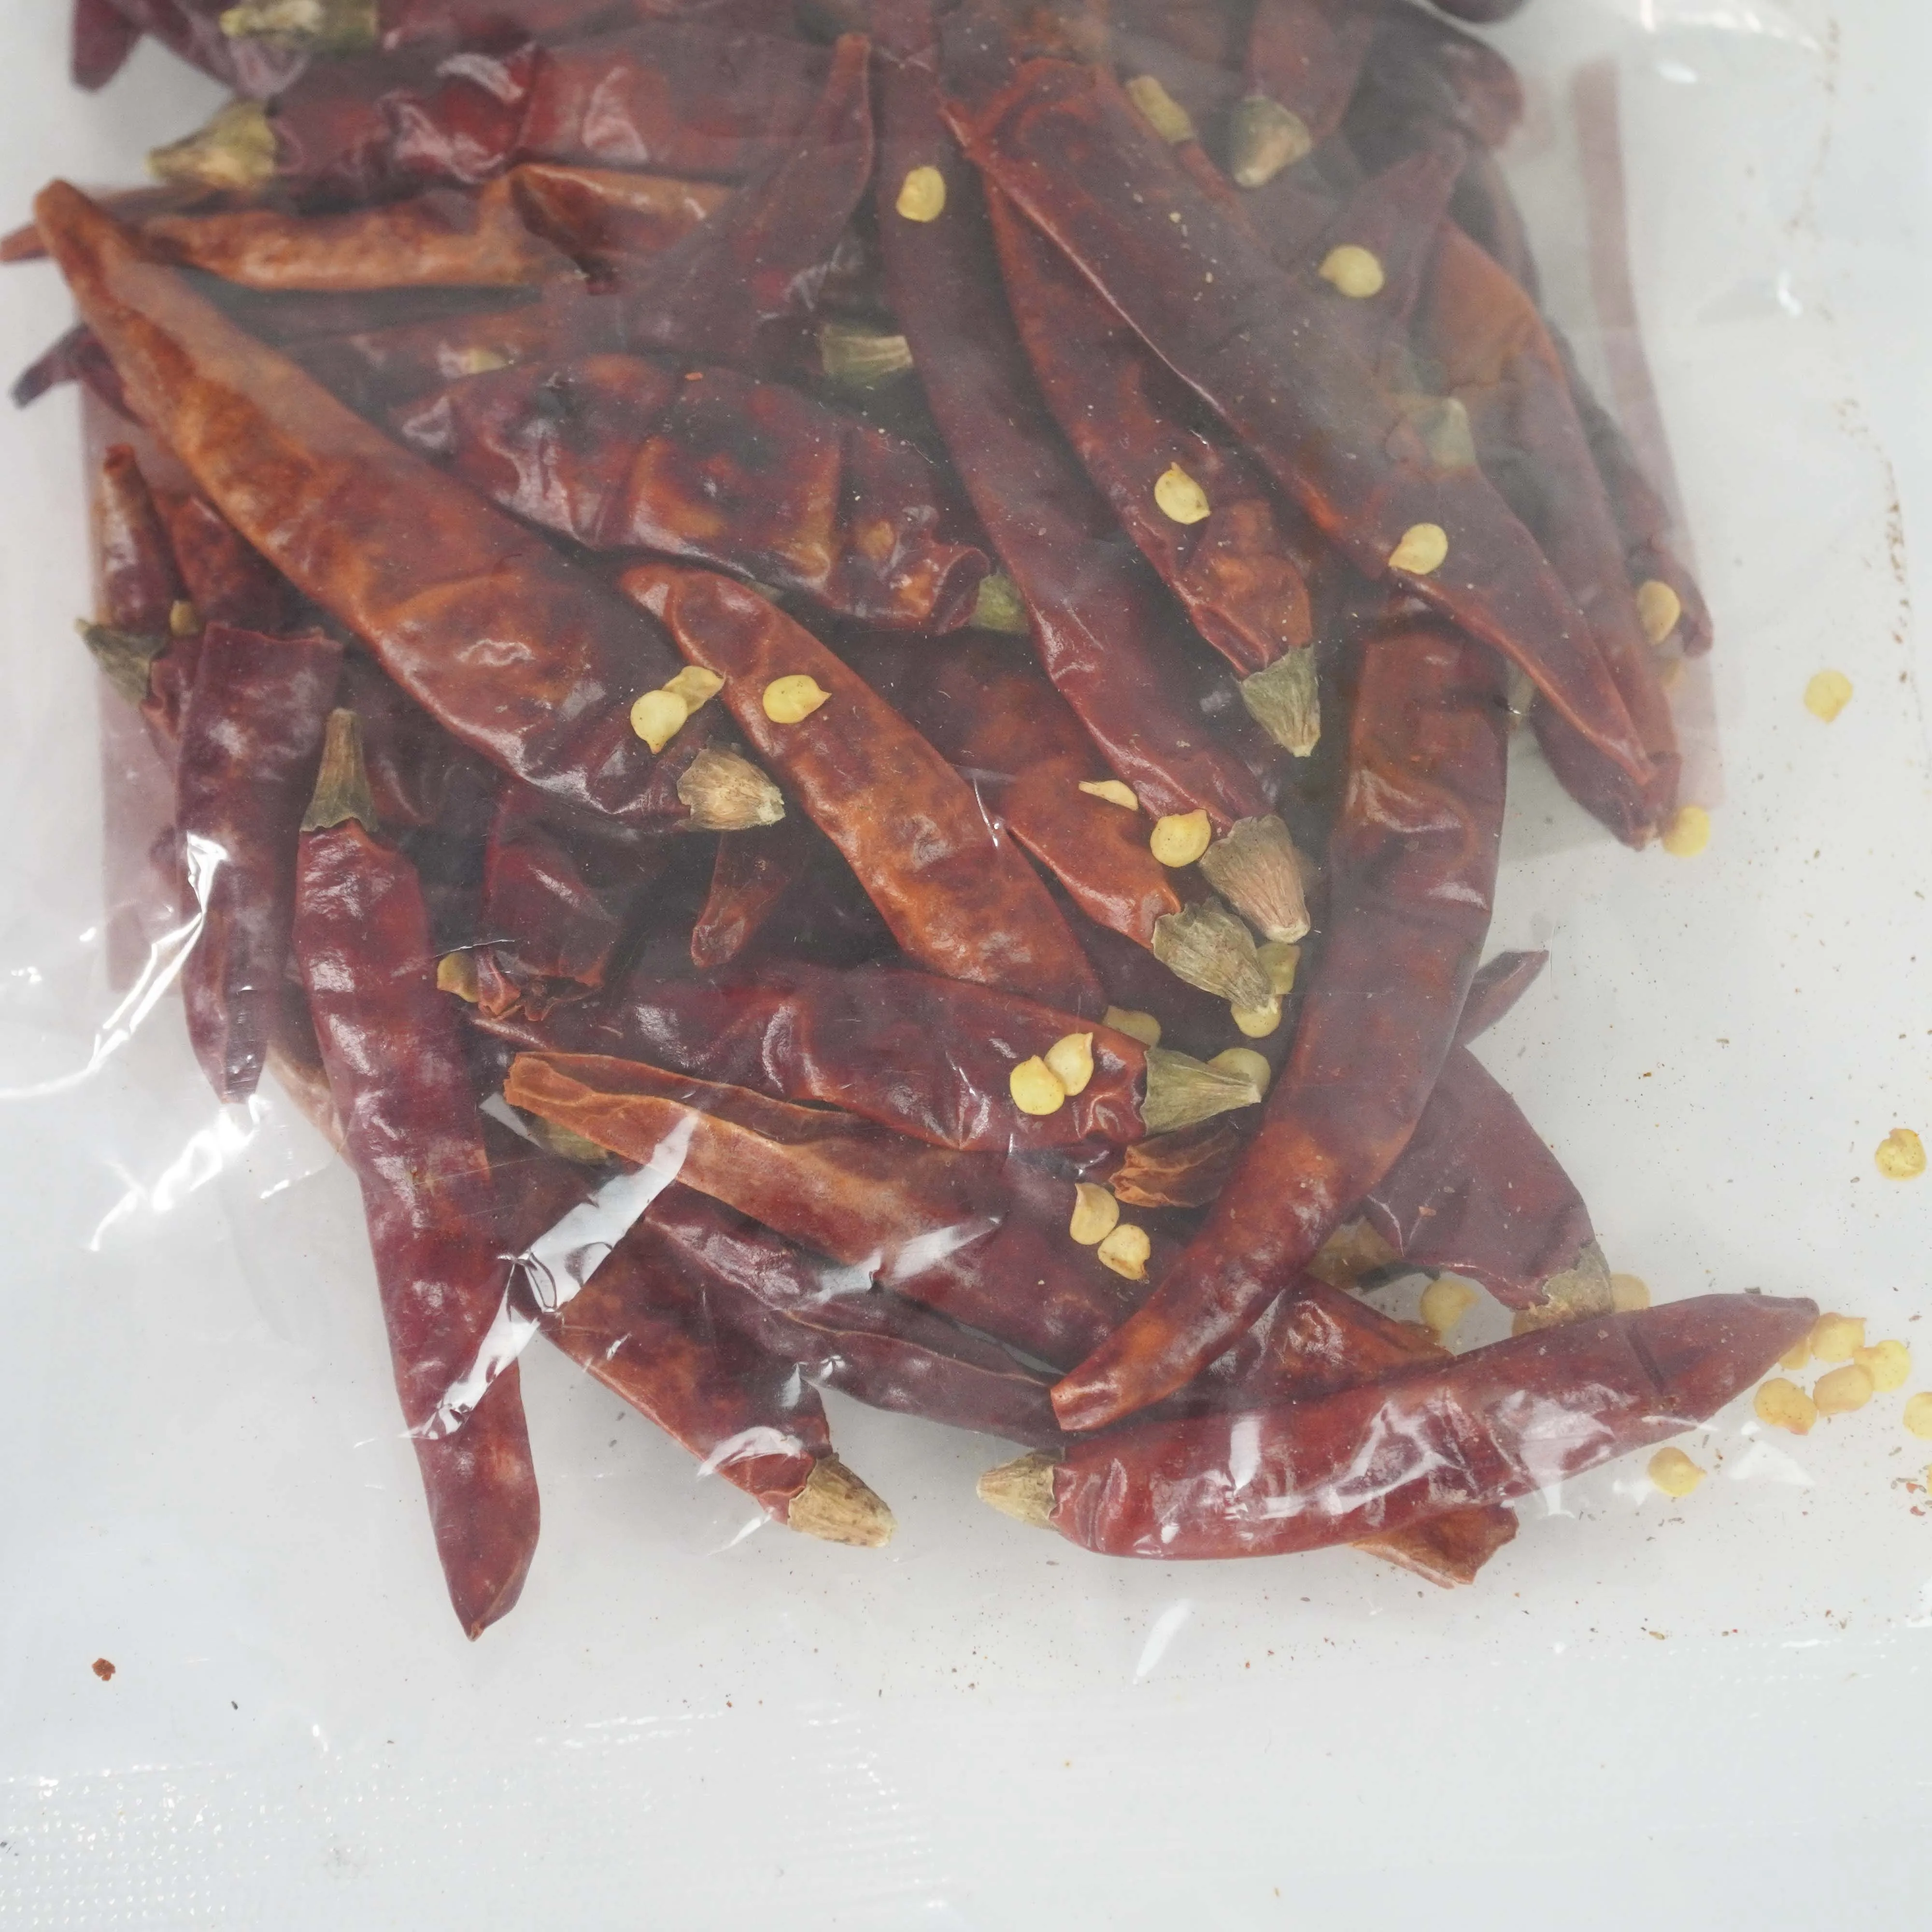 
Wholesale High Quality Red Bagged 50g Dried Chili 